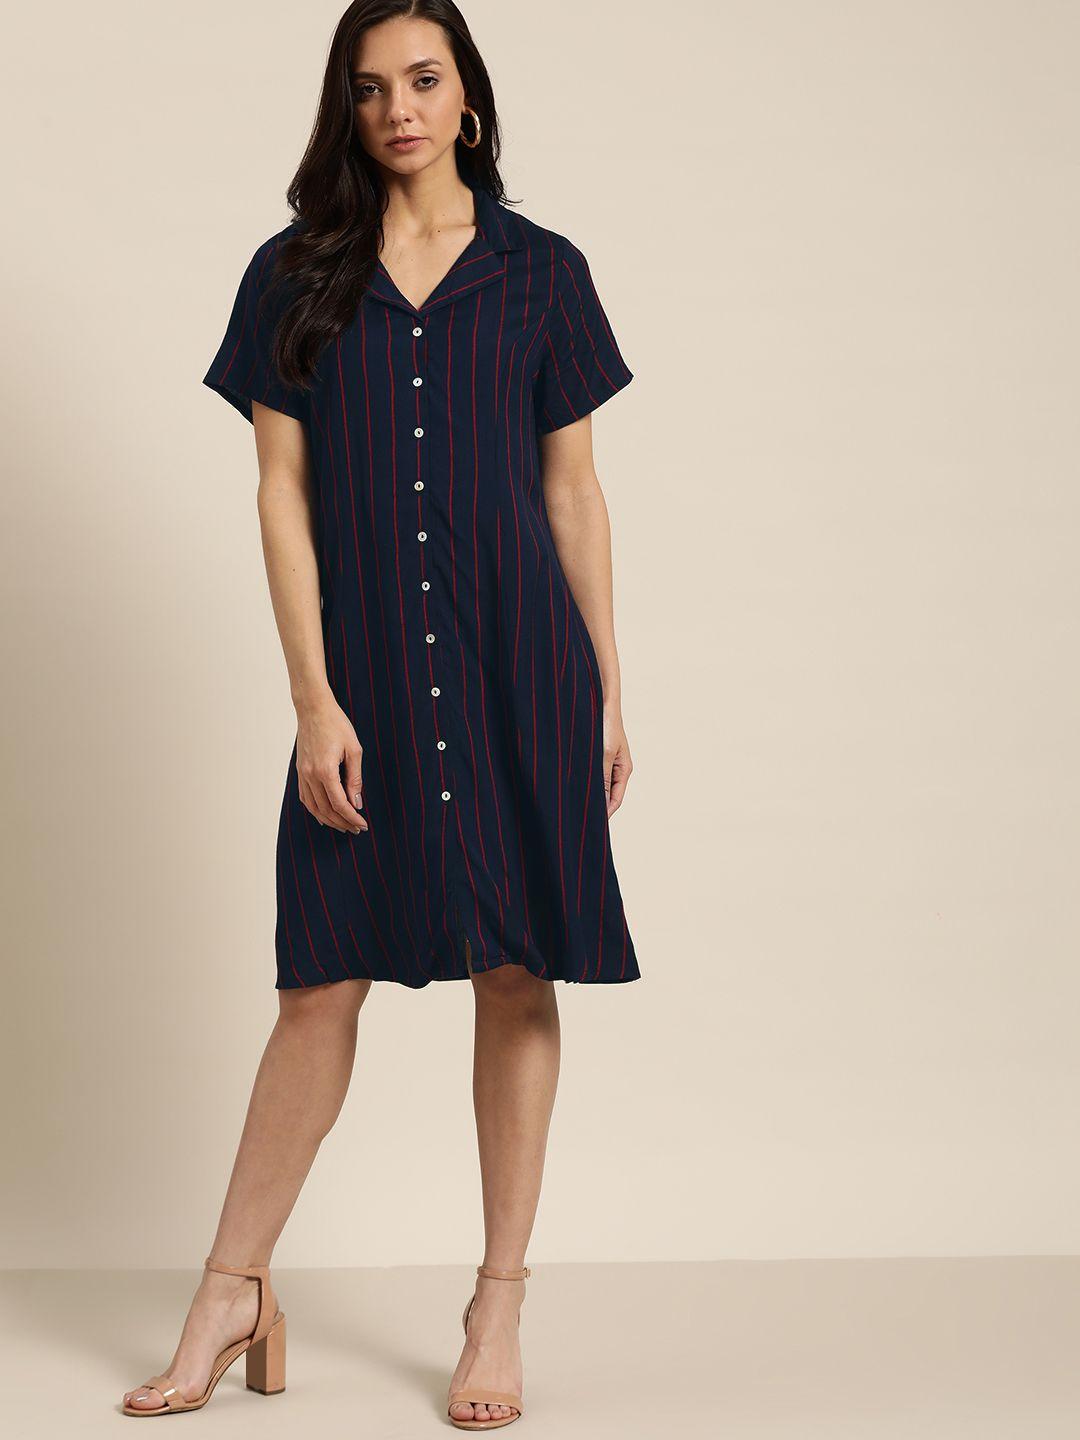 her by invictus women navy & red striped shirt dress